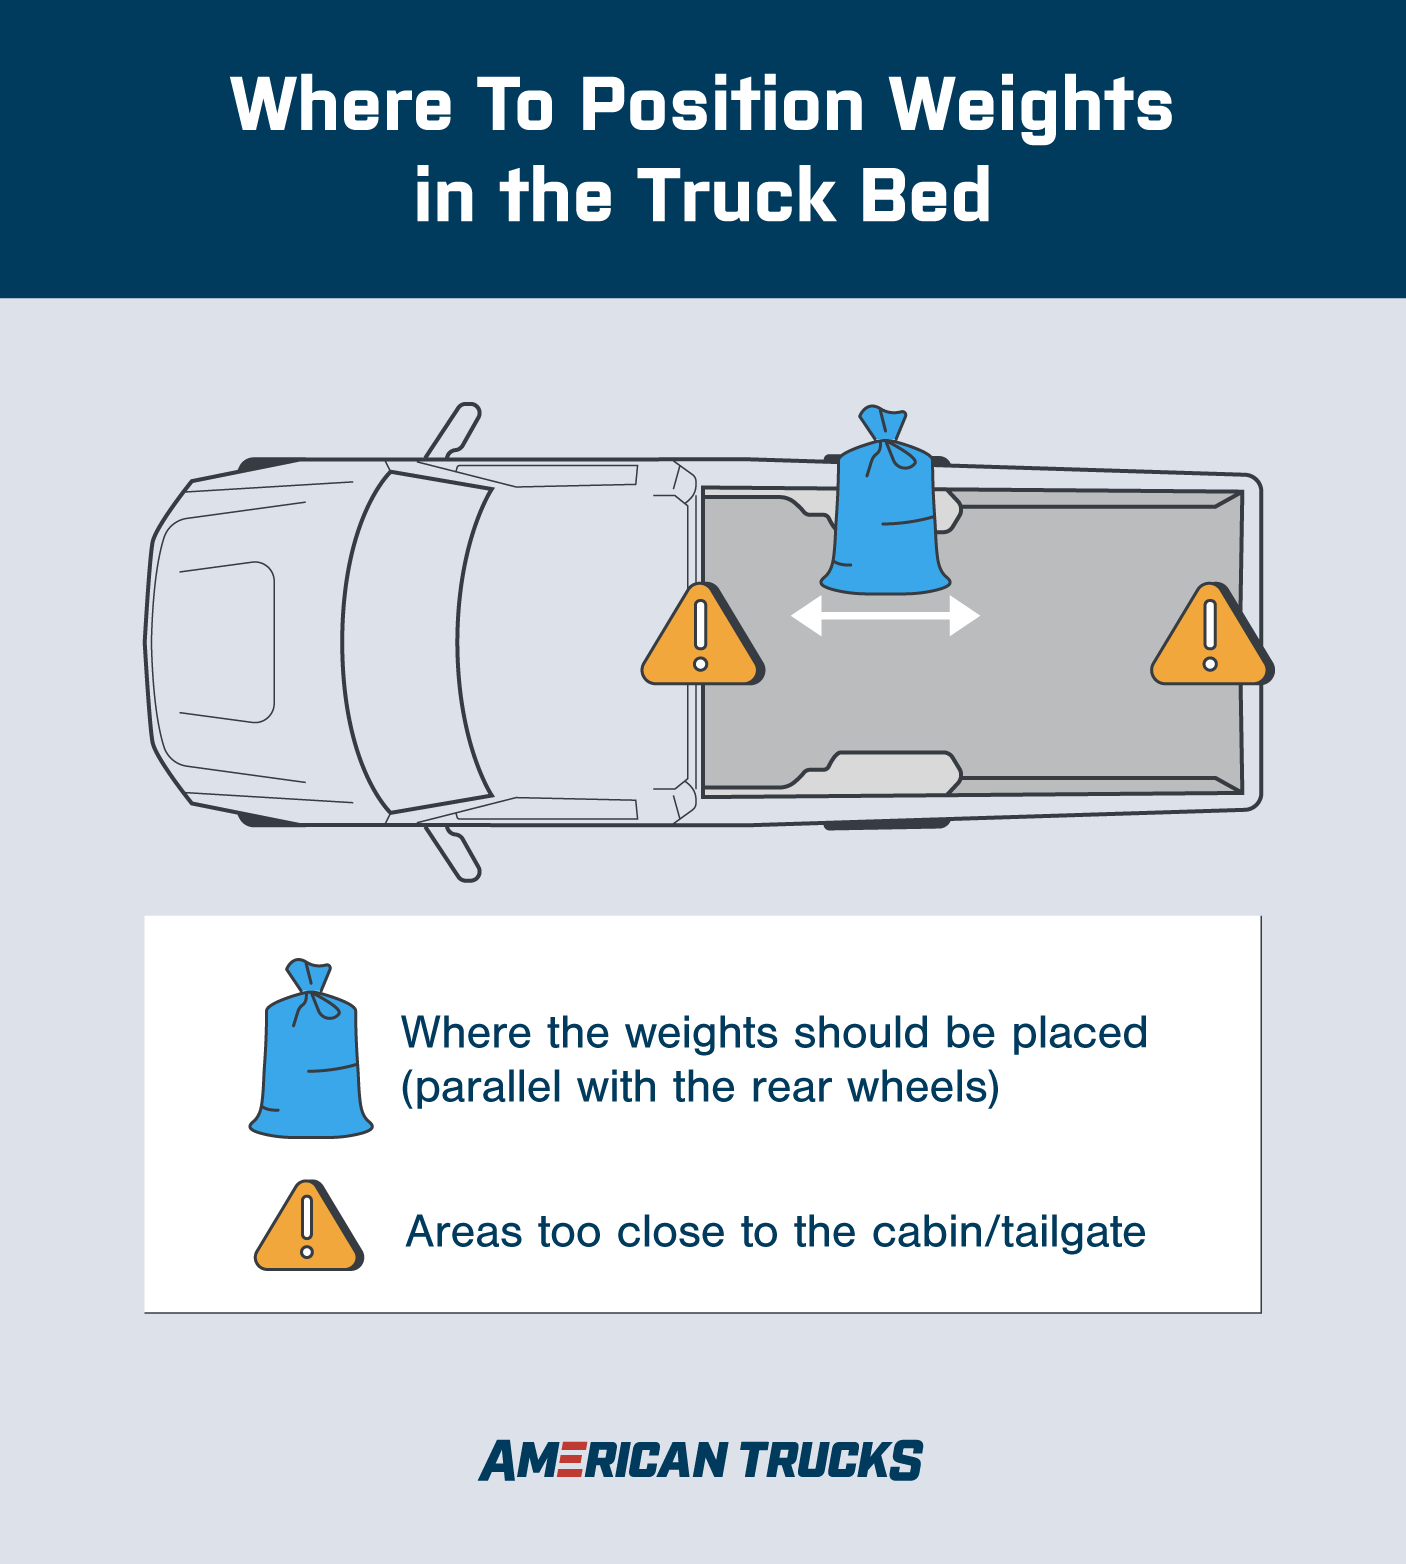 Graphic showing where to position weights in a truck bed and how to use truck bed weights for traction in the winter.